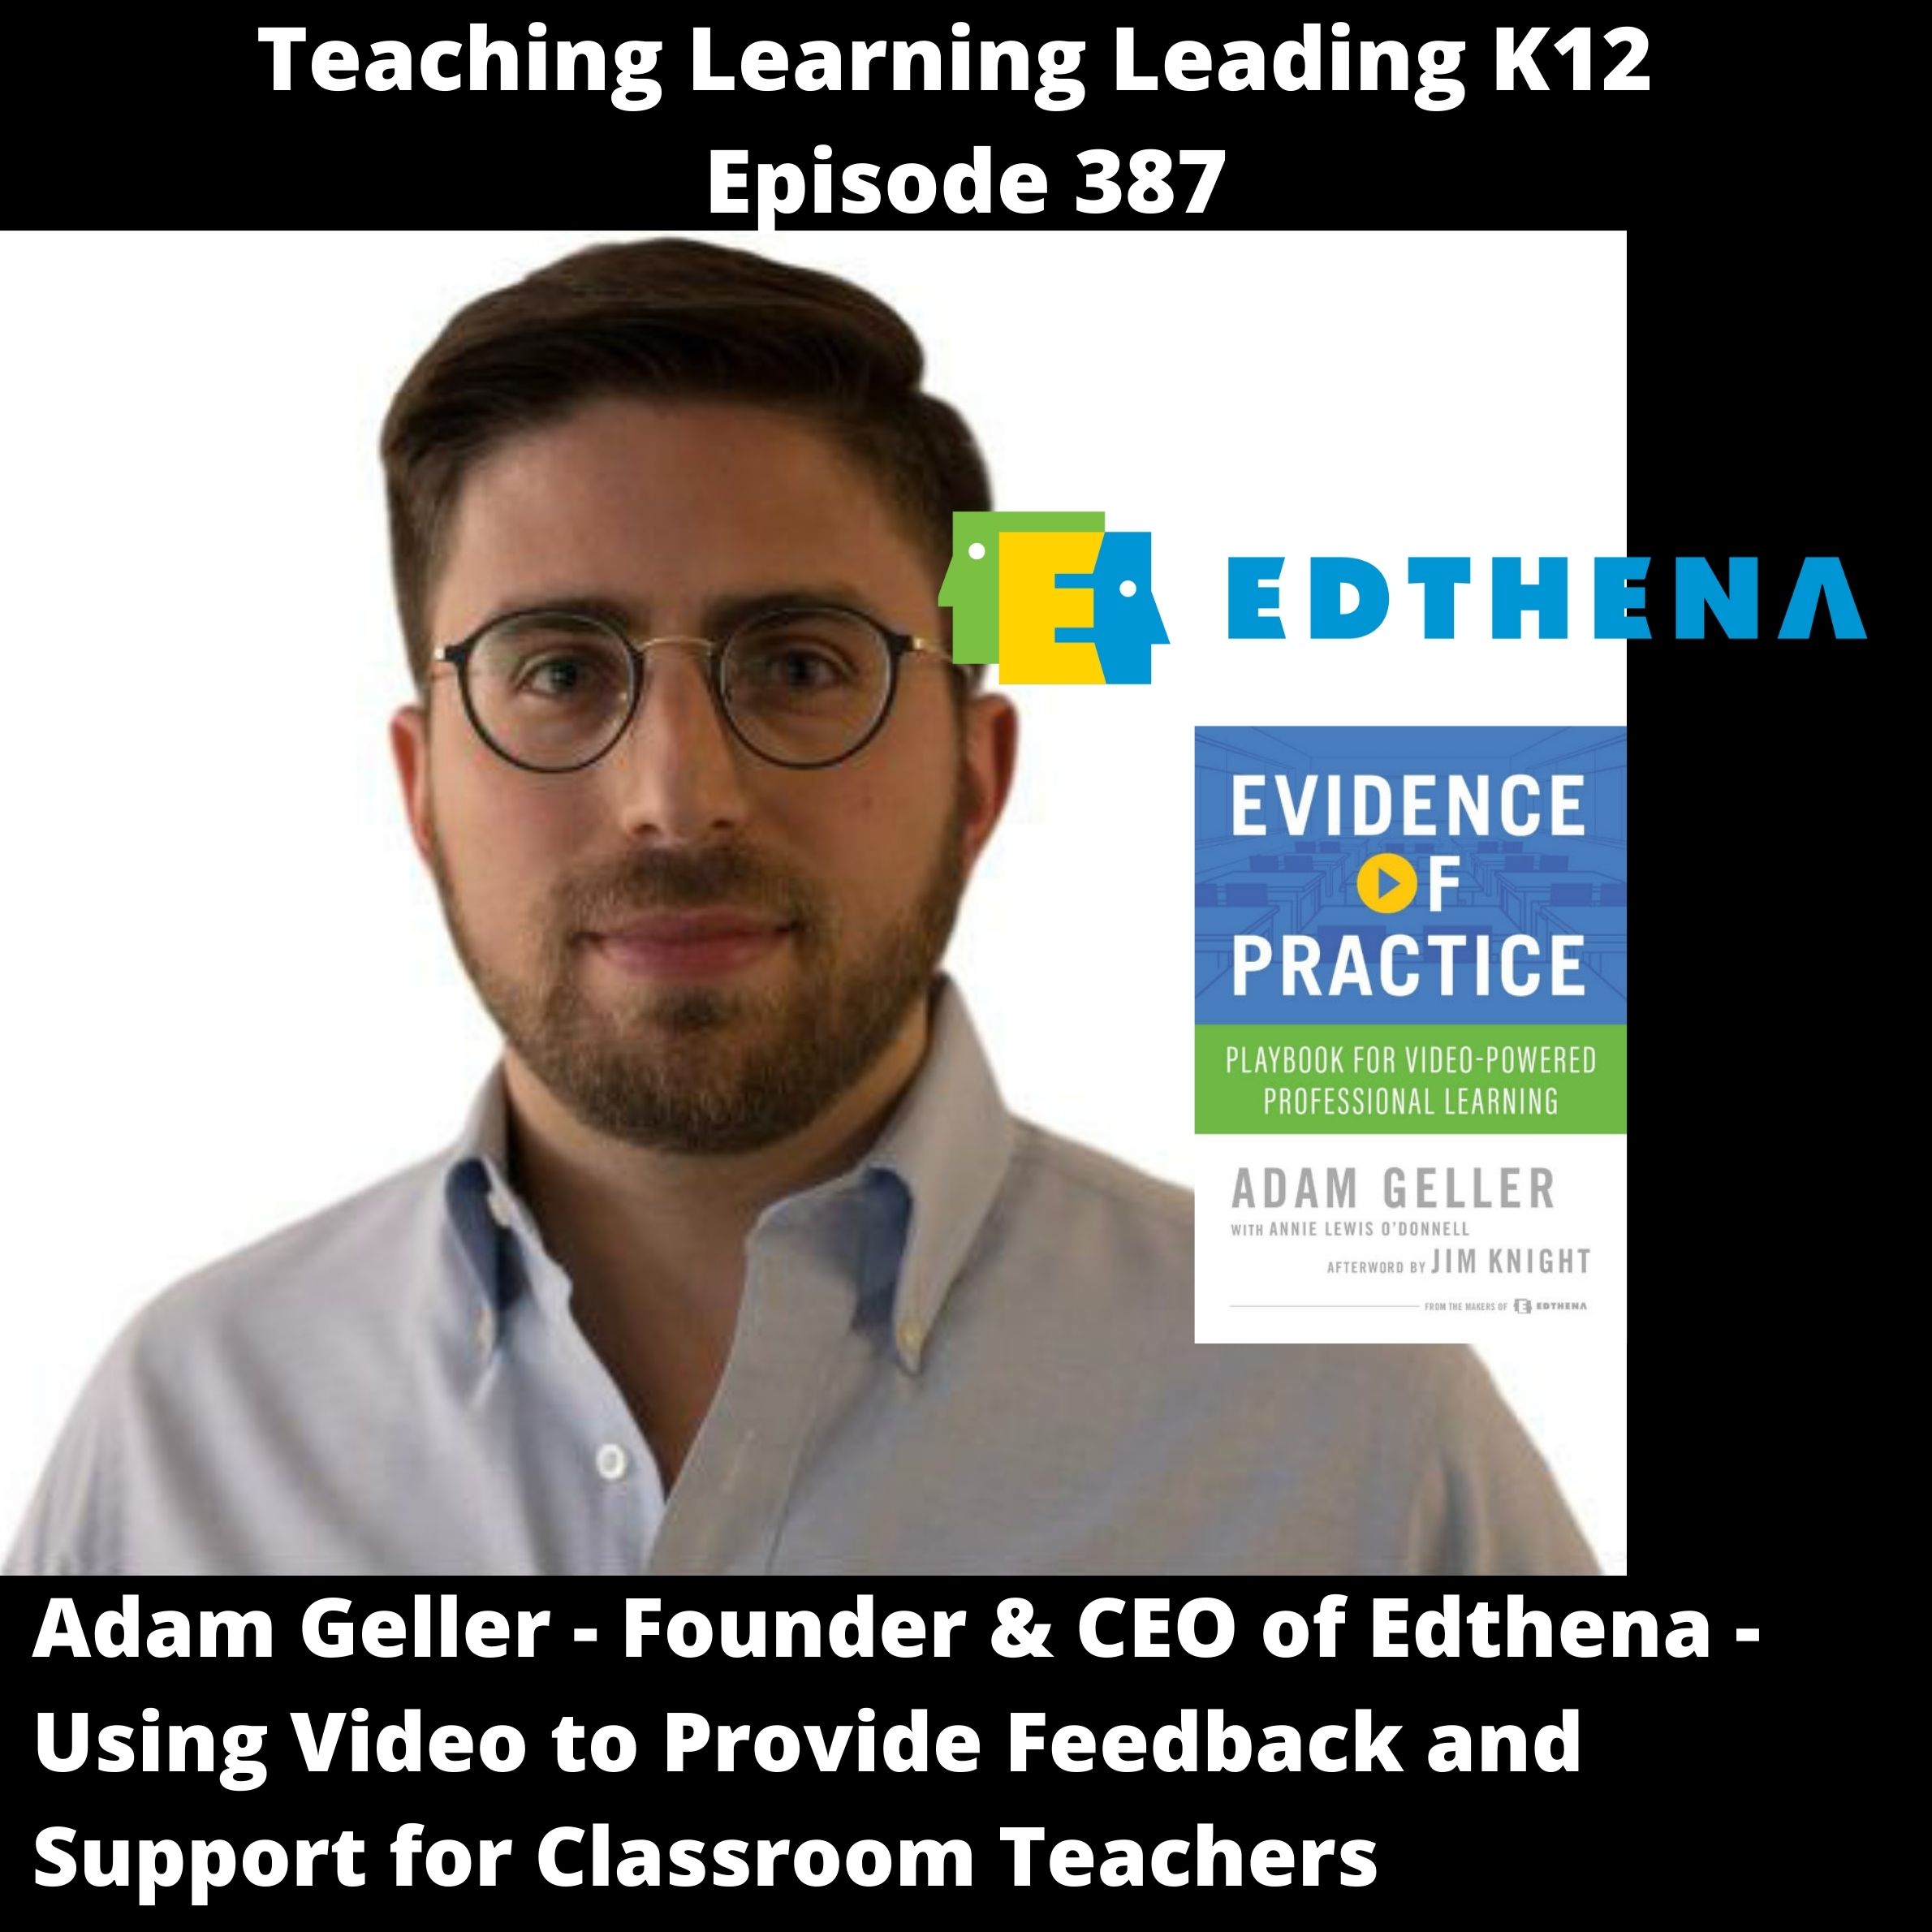 Adam Geller - Founder & CEO of Edthena - Using Video to Provide Feedback and Support for Classroom Teachers - 387